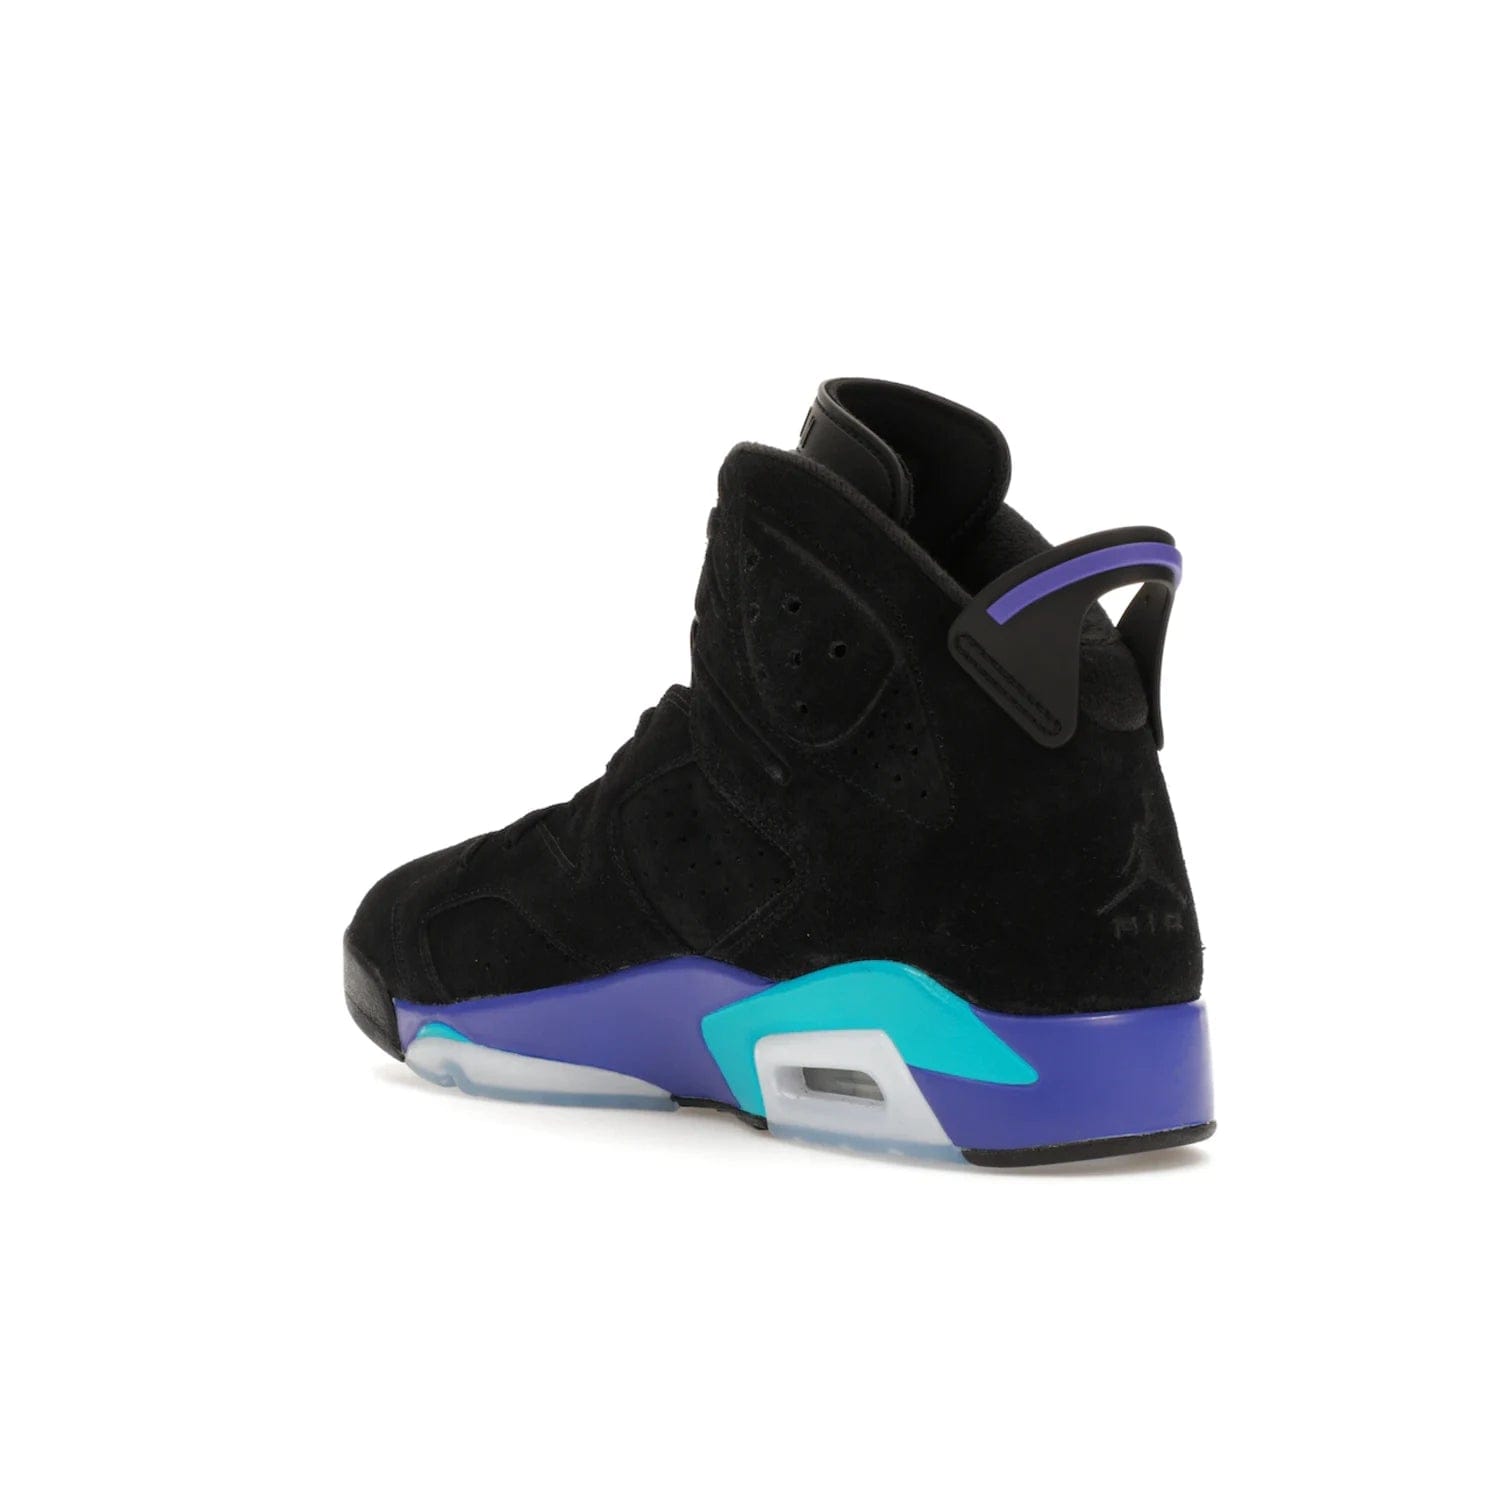 Jordan 6 Retro Aqua - Image 24 - Only at www.BallersClubKickz.com - Feel the classic Jordan 6 Retro Aqua paired with modern style. Black, Bright Concord, and Aquatone hues are crafted with a supple suede and rubberized heel tab. This standout sneaker adds signature Jordan elements at $200. Elevate your style with the Jordan 6 Retro Aqua.